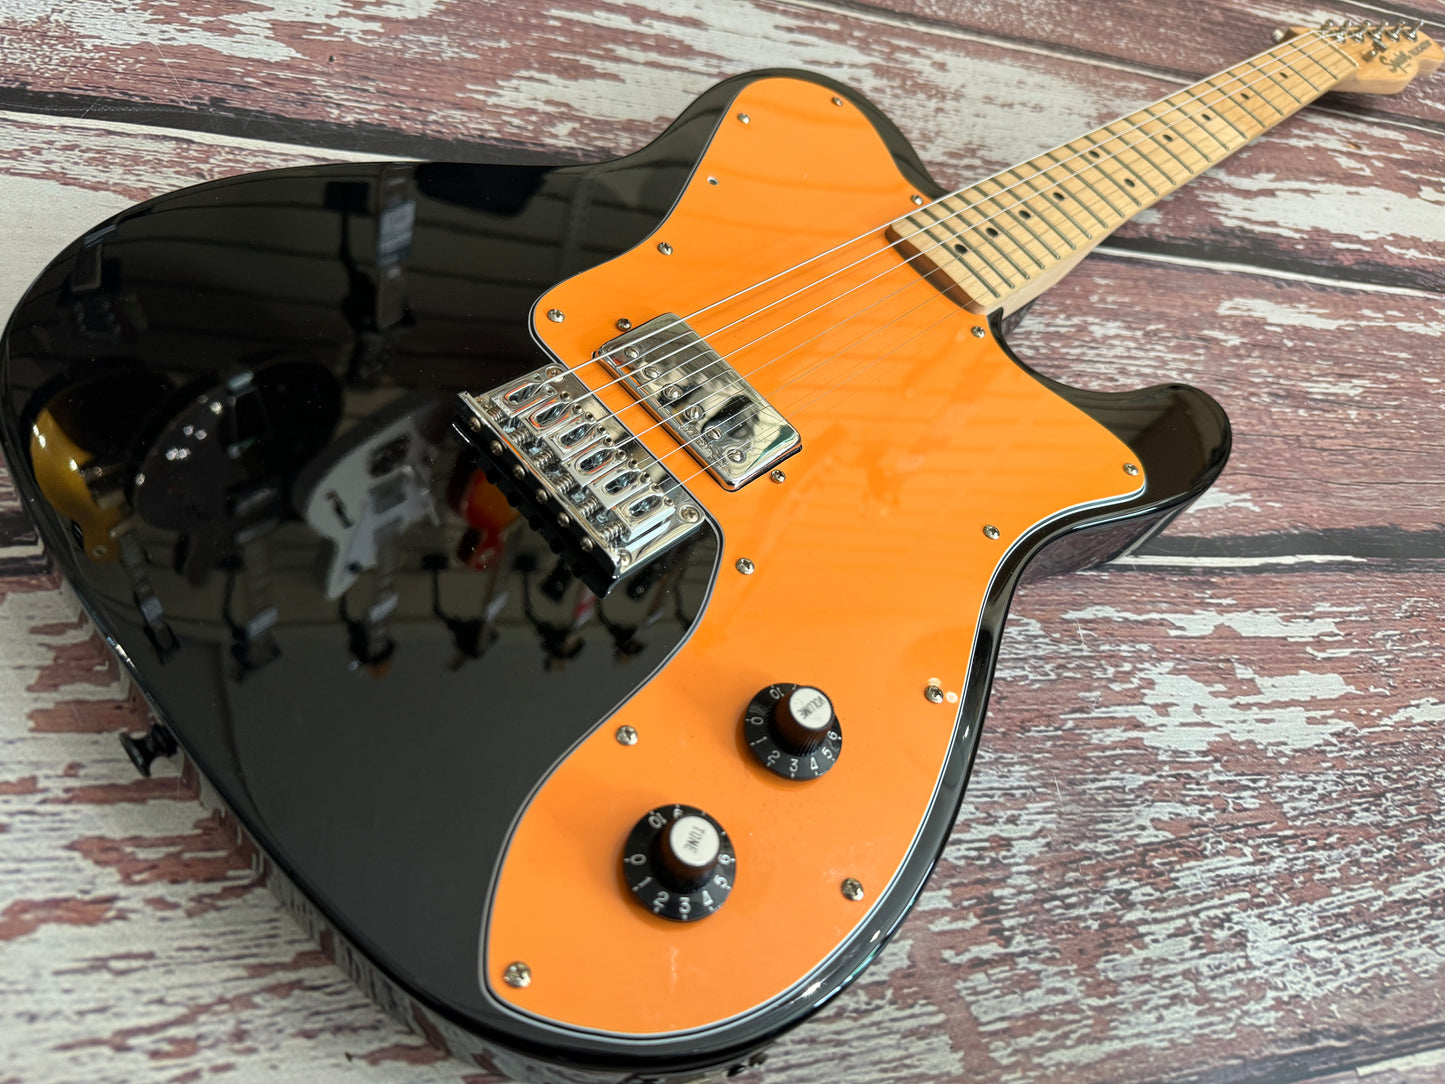 Squier "WTF" Telecaster thing!